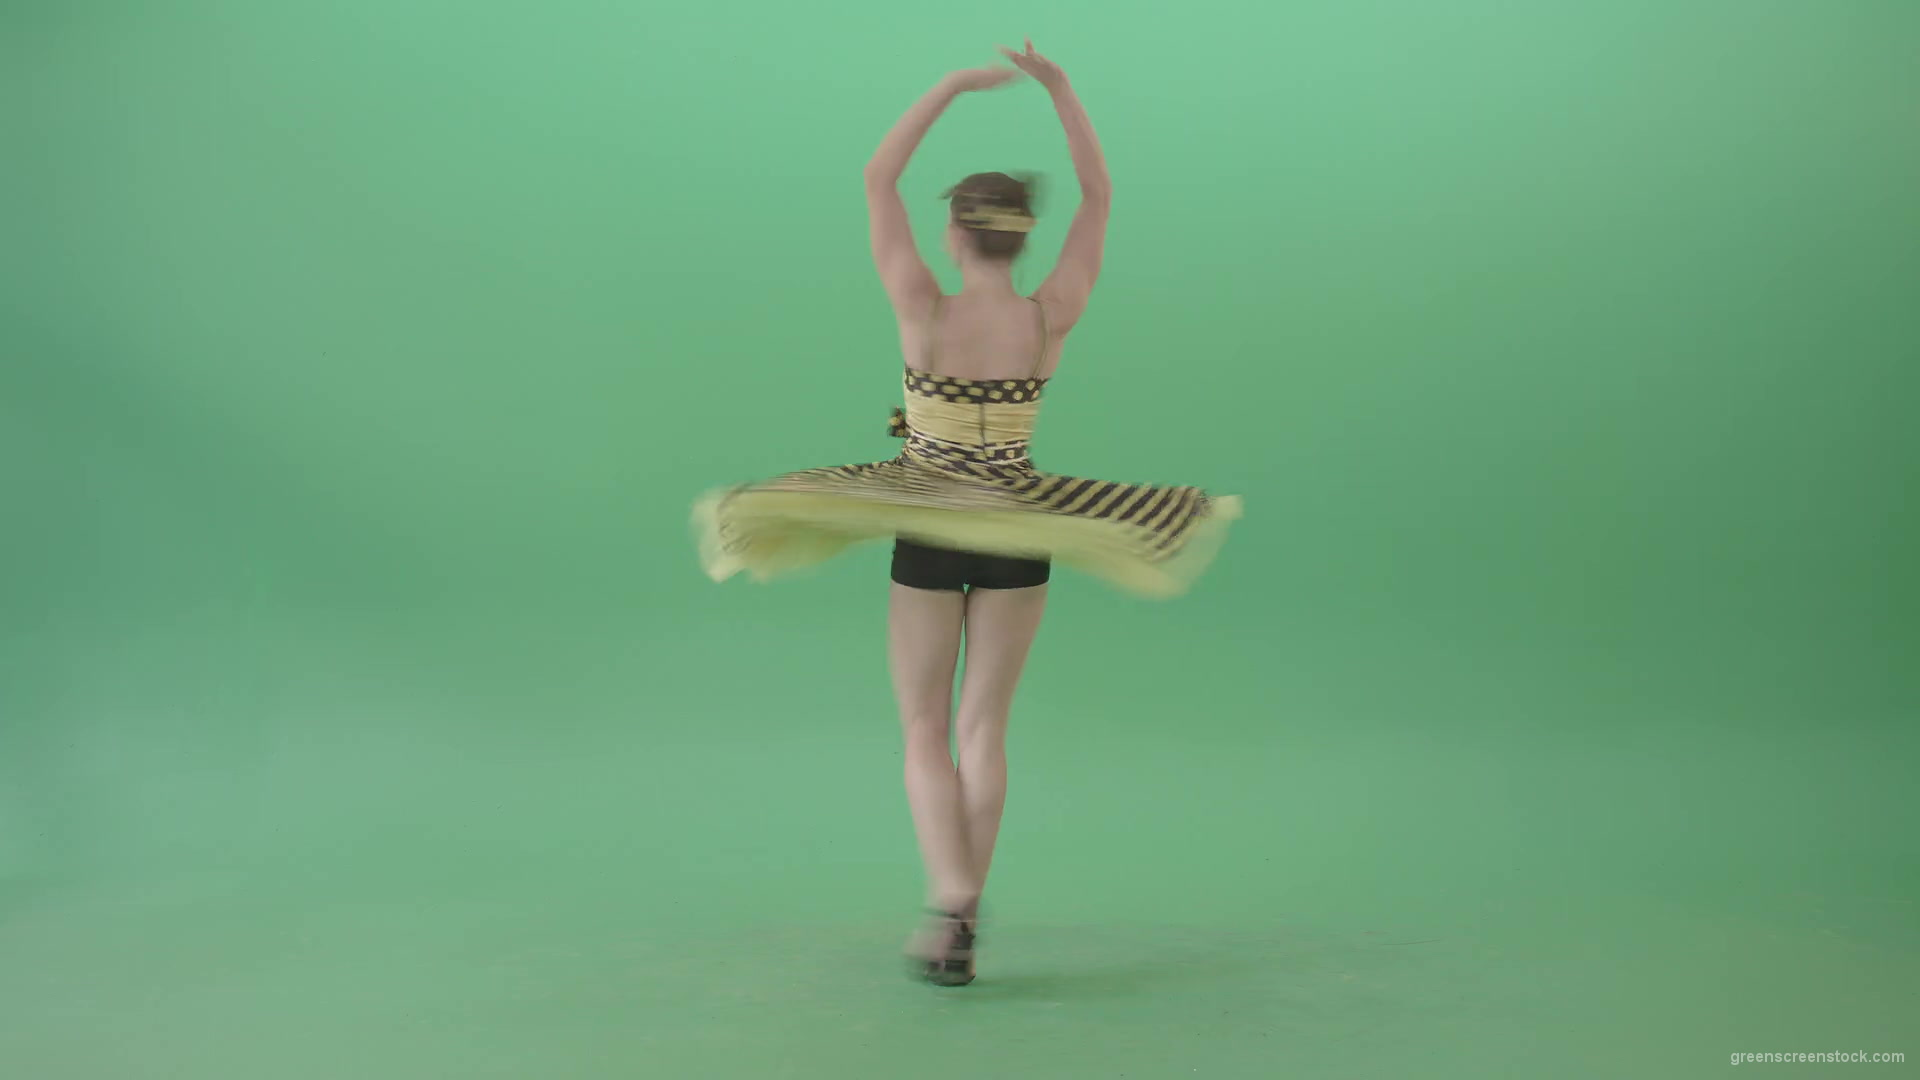 Beautiful-Woman-dancing-Boogie-woogie-and-jumping-in-Jazz-dance-isolated-on-Green-Screen-4K-Video-Footage-1920_009 Green Screen Stock